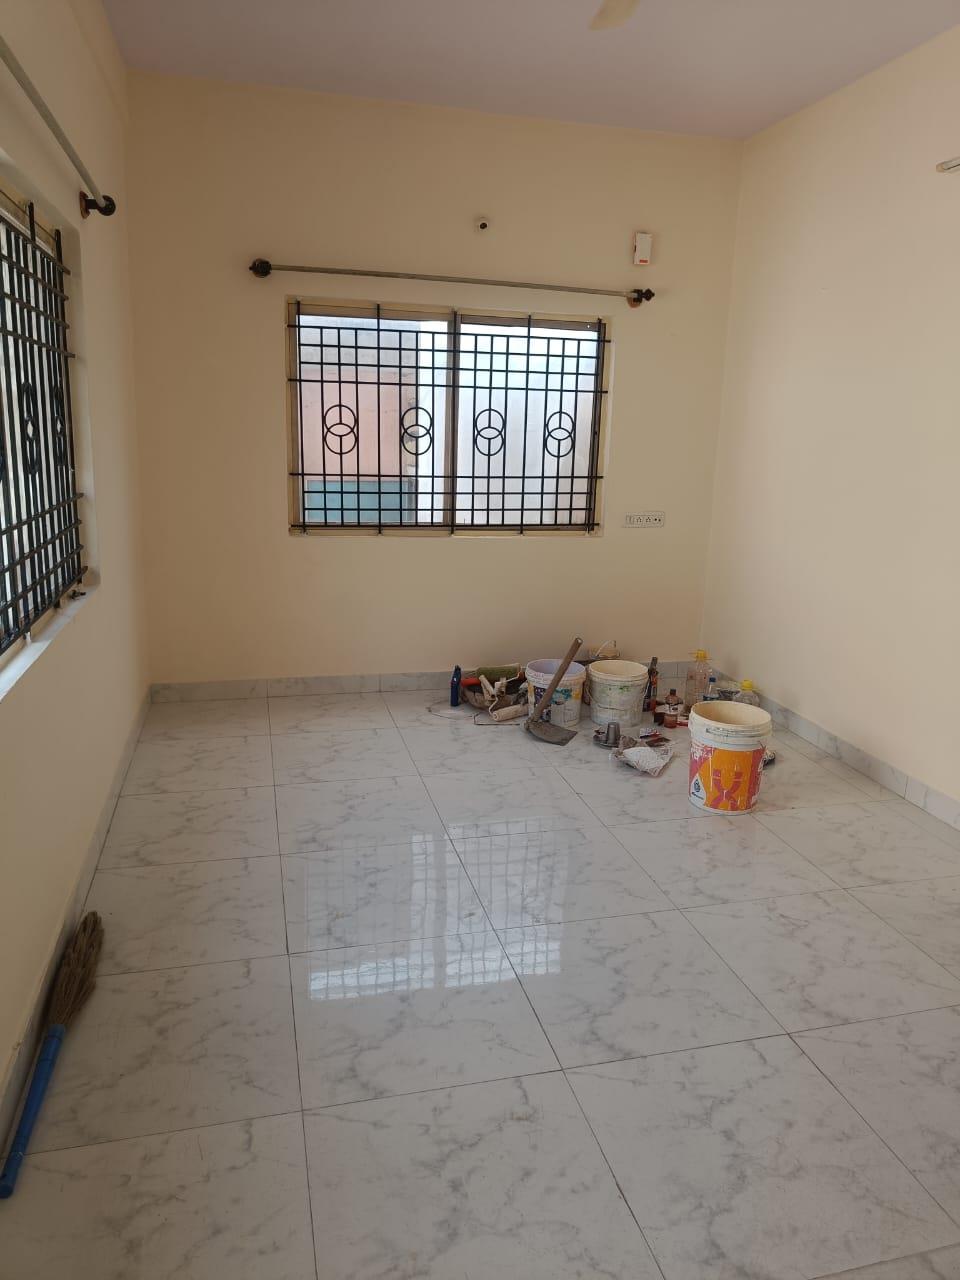 2 BHK Independent House for Lease Only at 24 Lakhs - JAML2 - 110 in Sarjapur